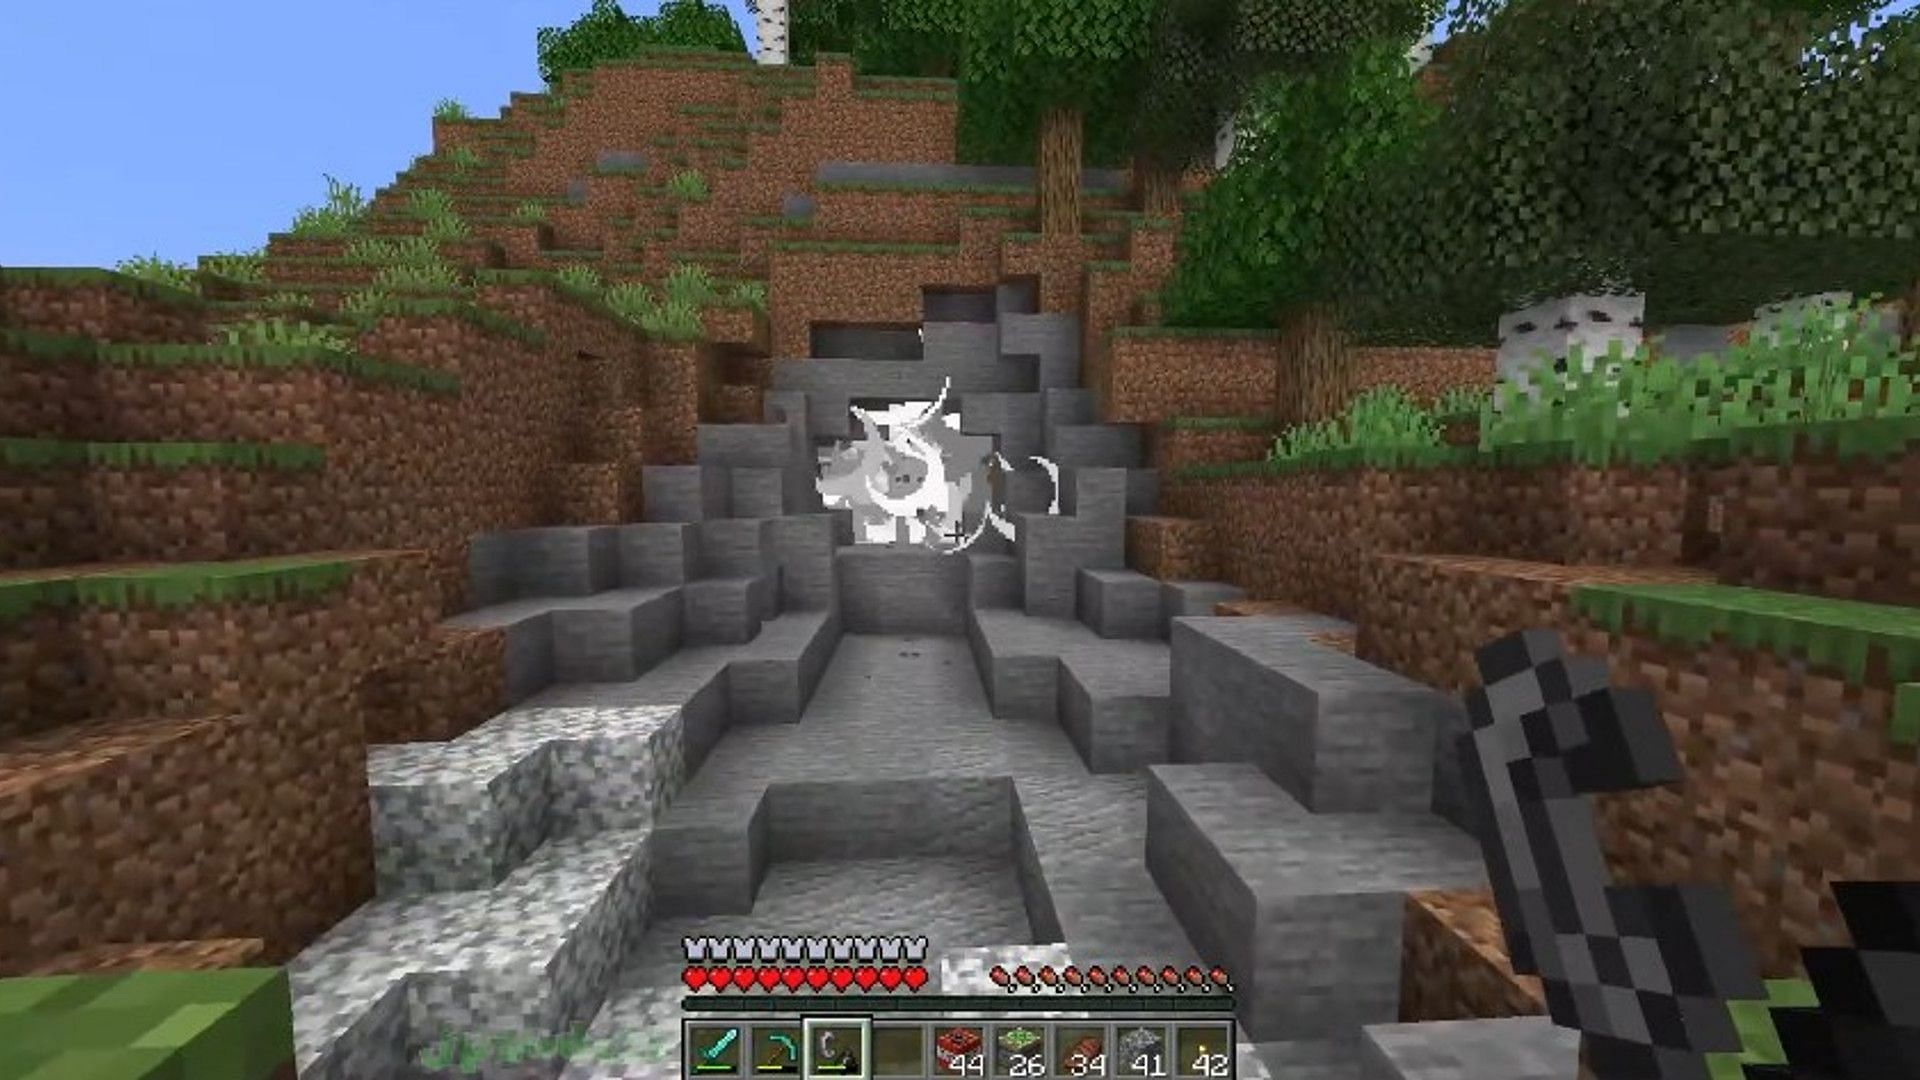 TNT exploding in a cluster of stone (Image via Mojang)